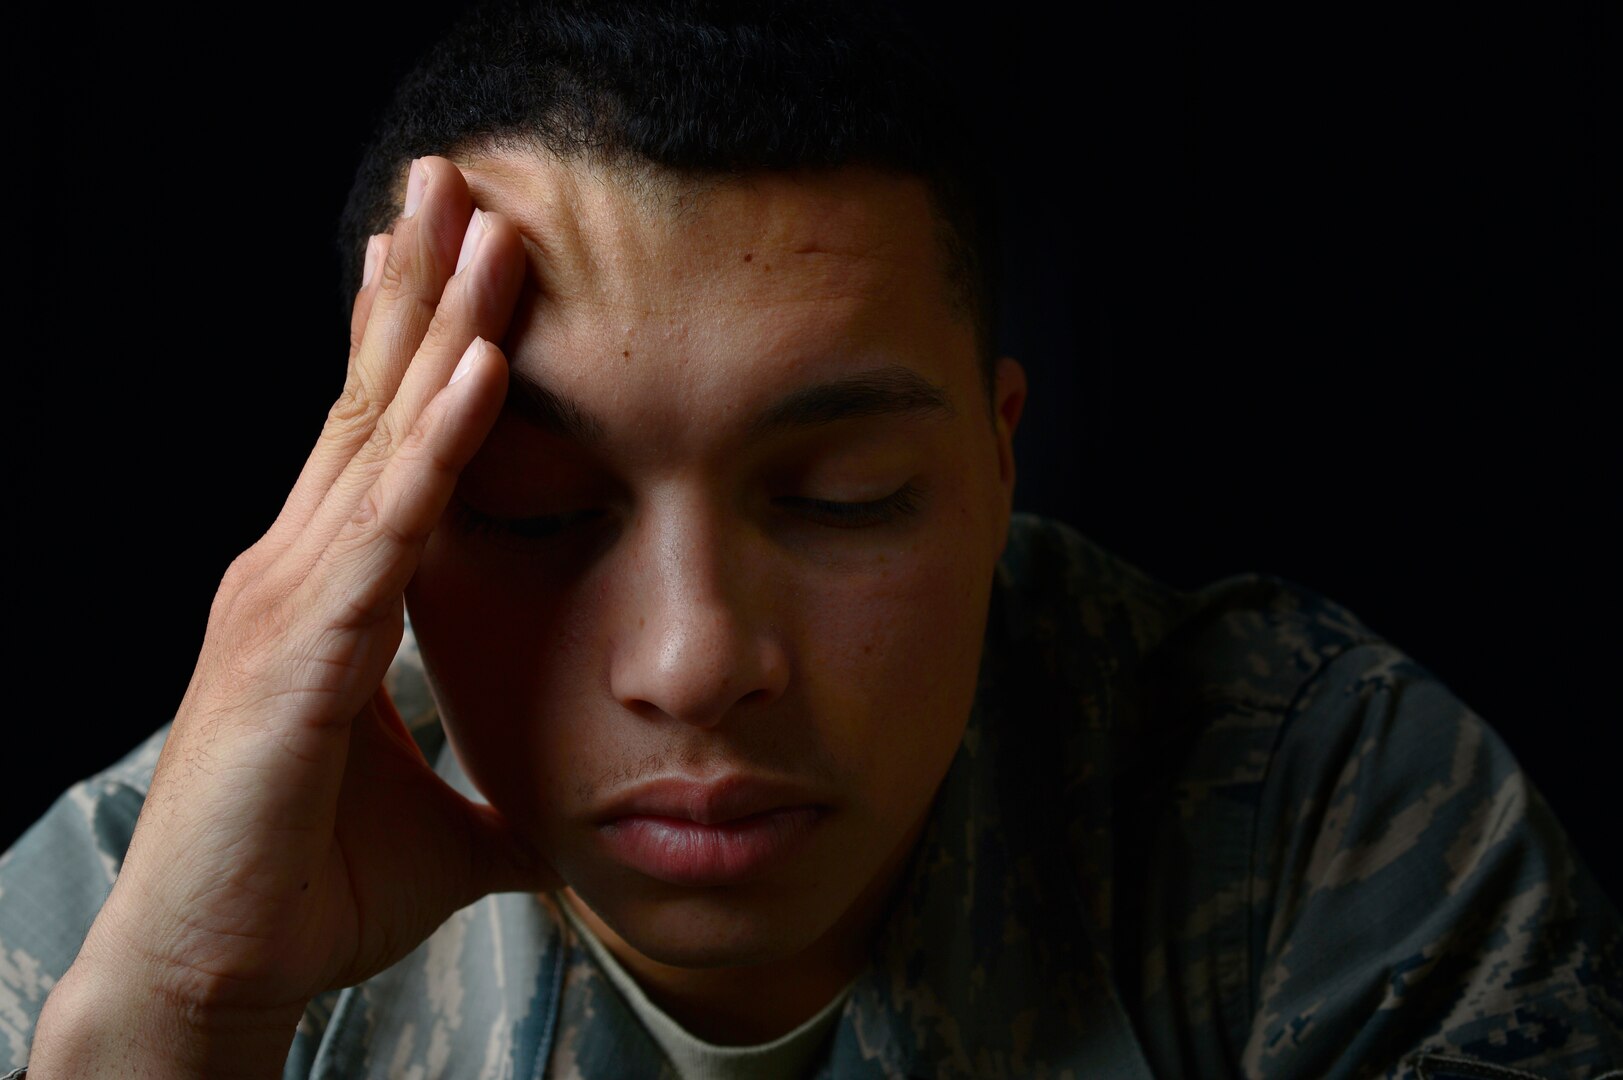 Post-traumatic stress disorder is commonly associated with combat-related trauma, but service members may not know that PTSD can also be caused by many noncombat-related experiences. These noncombat-related trauma include car accidents, mass shootings, natural disasters, physical, sexual, and emotional abuse. (Photo credit: Senior Airman Christian Clausen, Creech AFB)